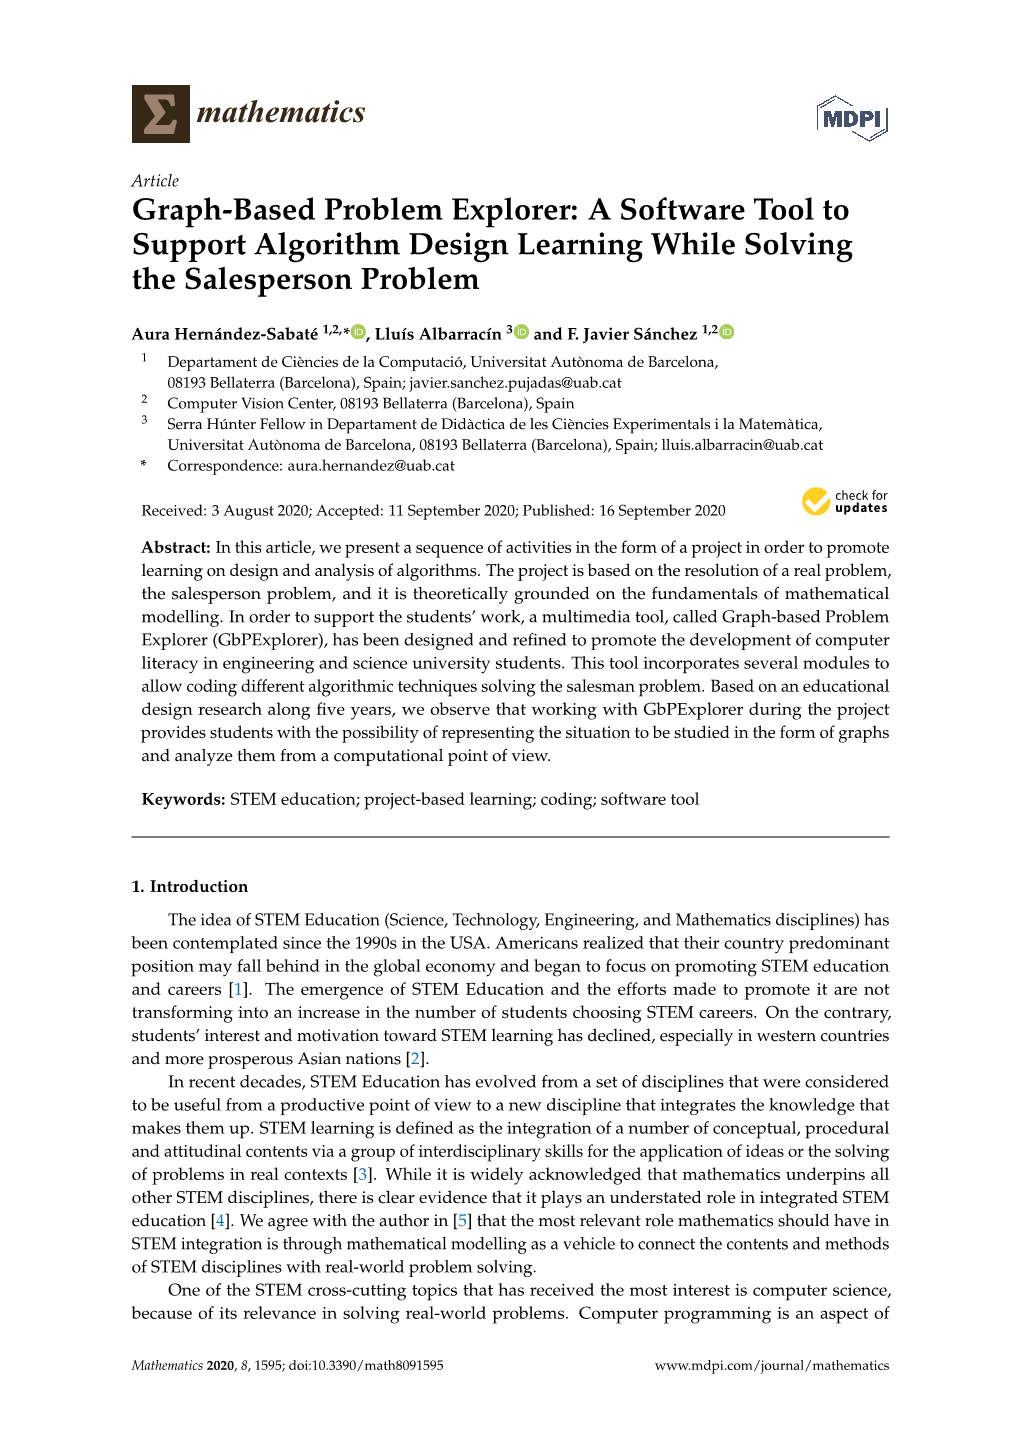 Graph-Based Problem Explorer: a Software Tool to Support Algorithm Design Learning While Solving the Salesperson Problem